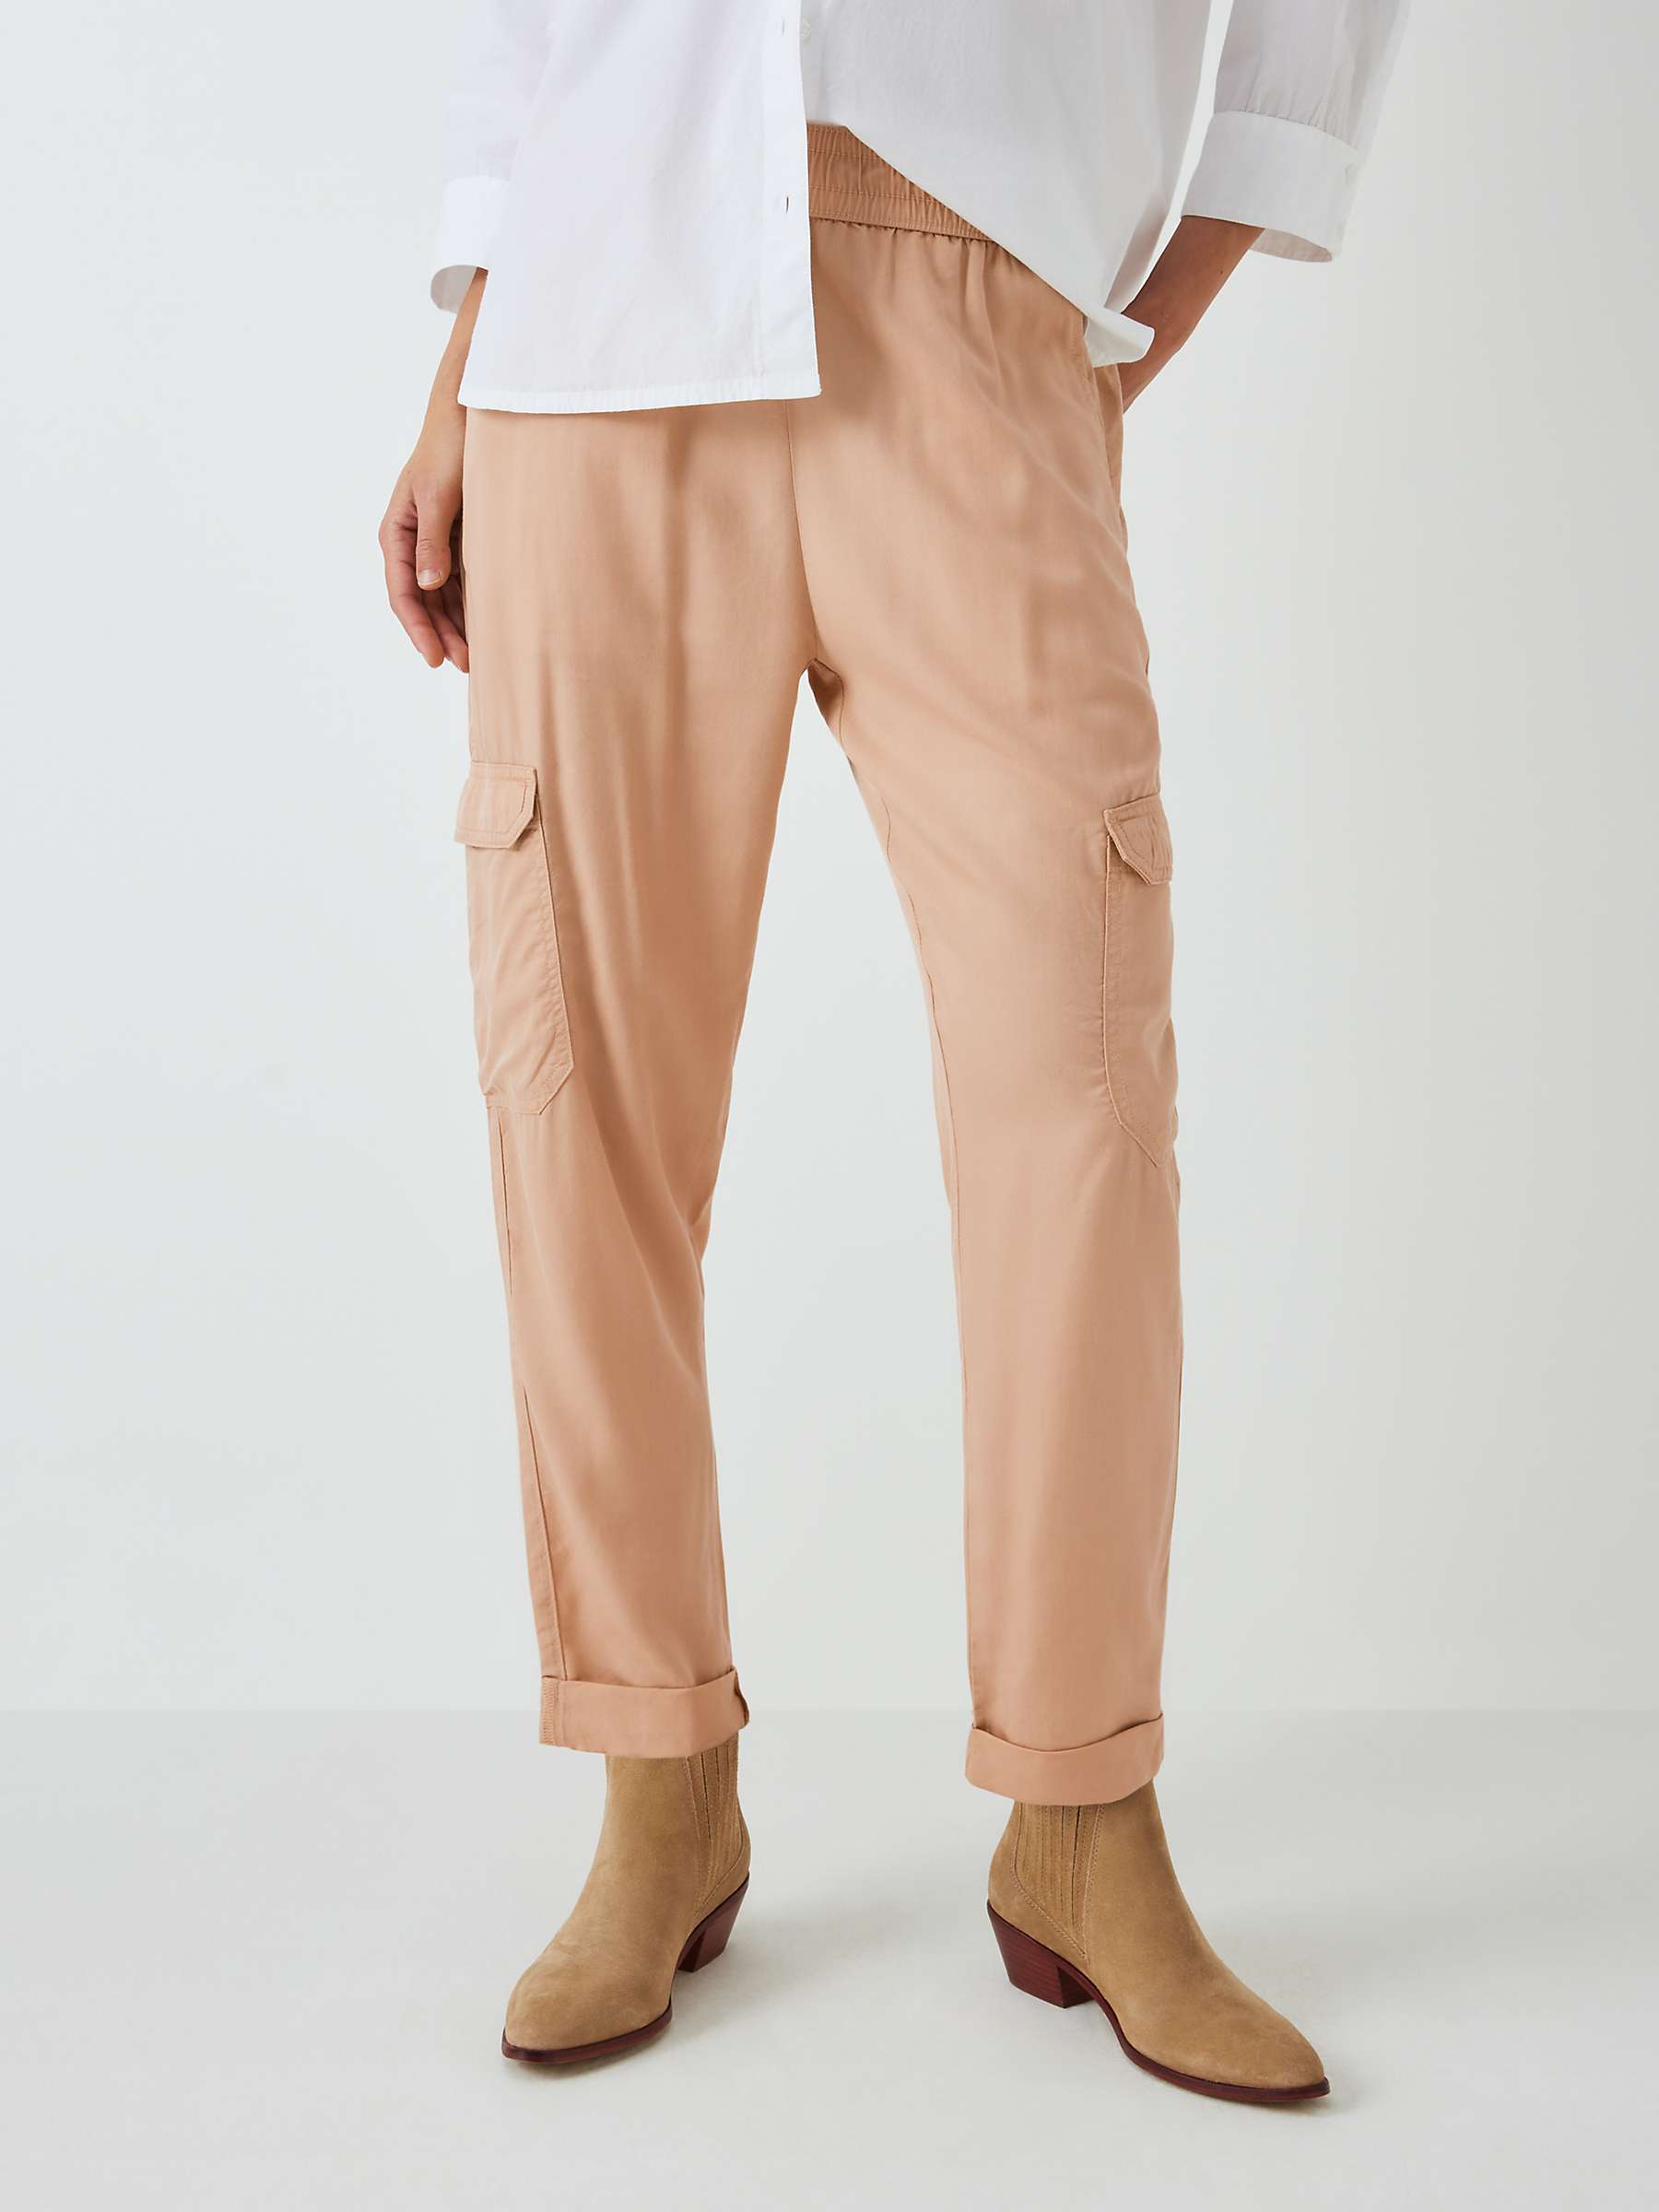 Buy John Lewis ANYDAY Turnup Cargo Trousers, Stone Online at johnlewis.com